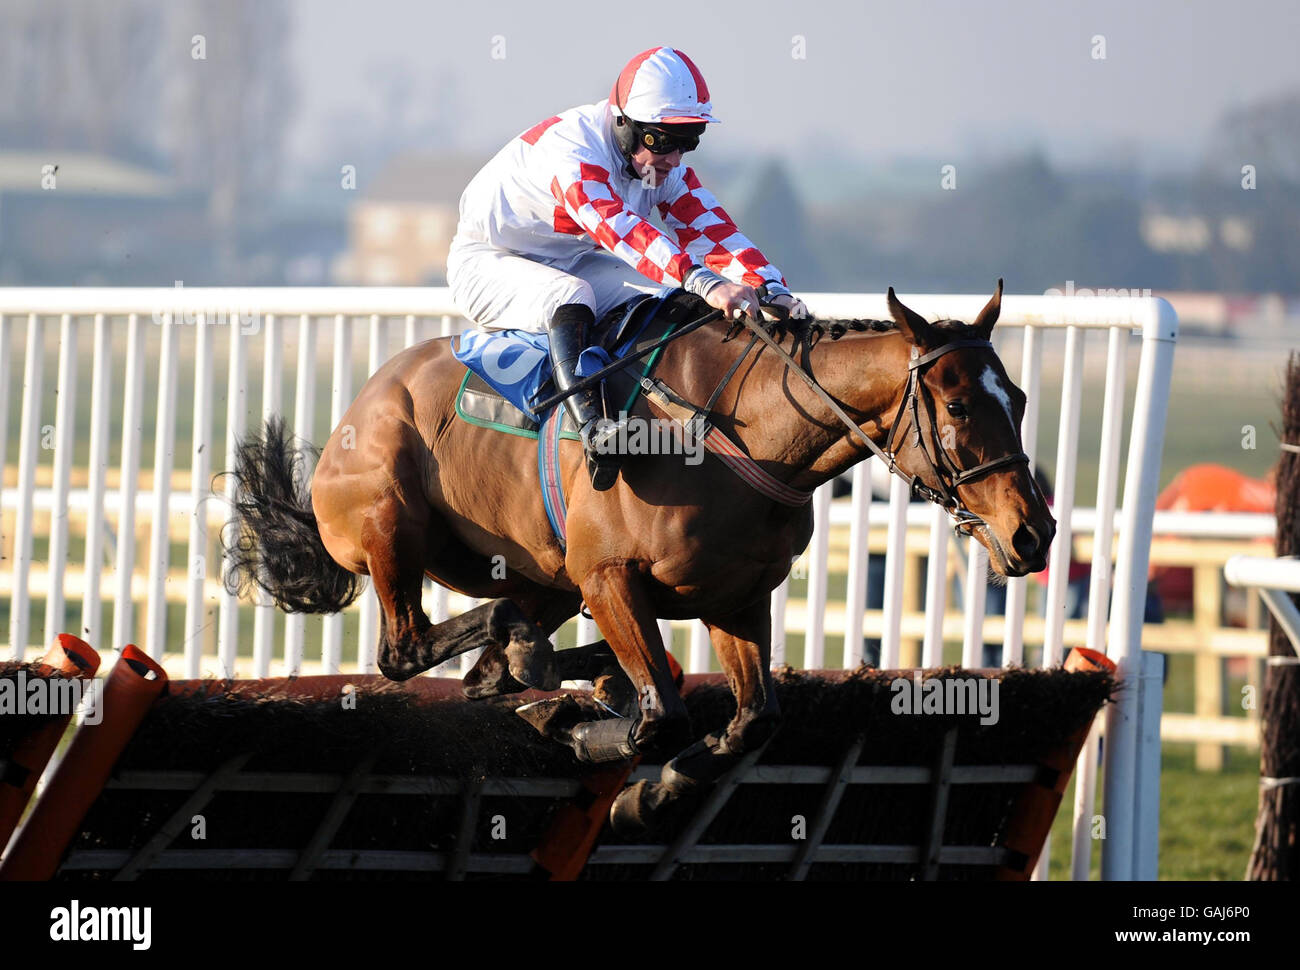 Lazy Darren ridden by Richard McGrath clears the last to win The New Bramham Hall for Conferences & Banqueting Novices' Hurdle Race at Wetherby Racecourse. Stock Photo